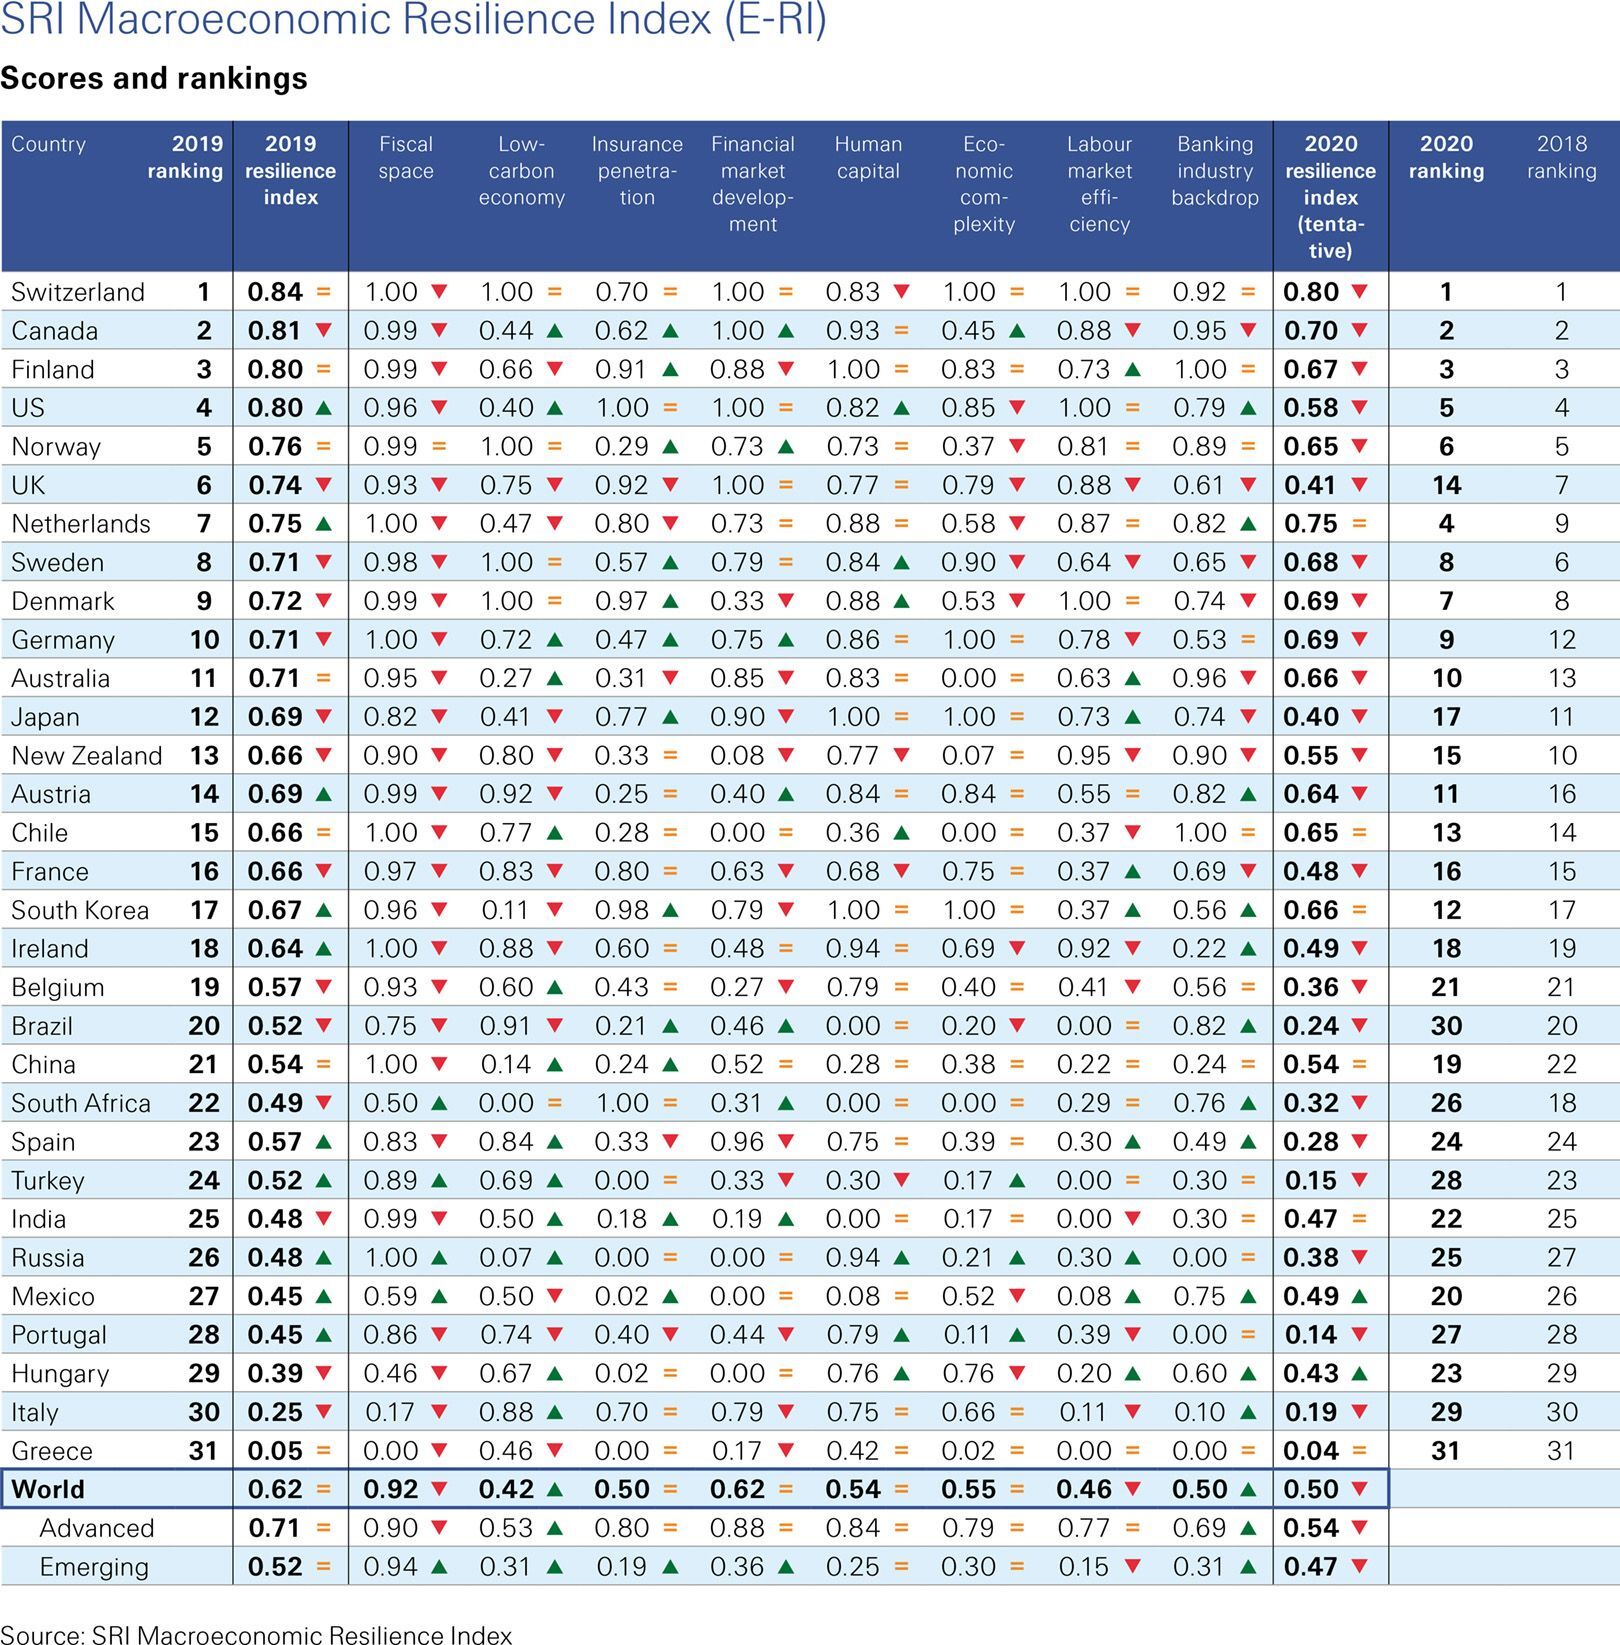 sigma-resilience-index-update-table-1-complete.jpg?mtime=20200914154131#asset:208792